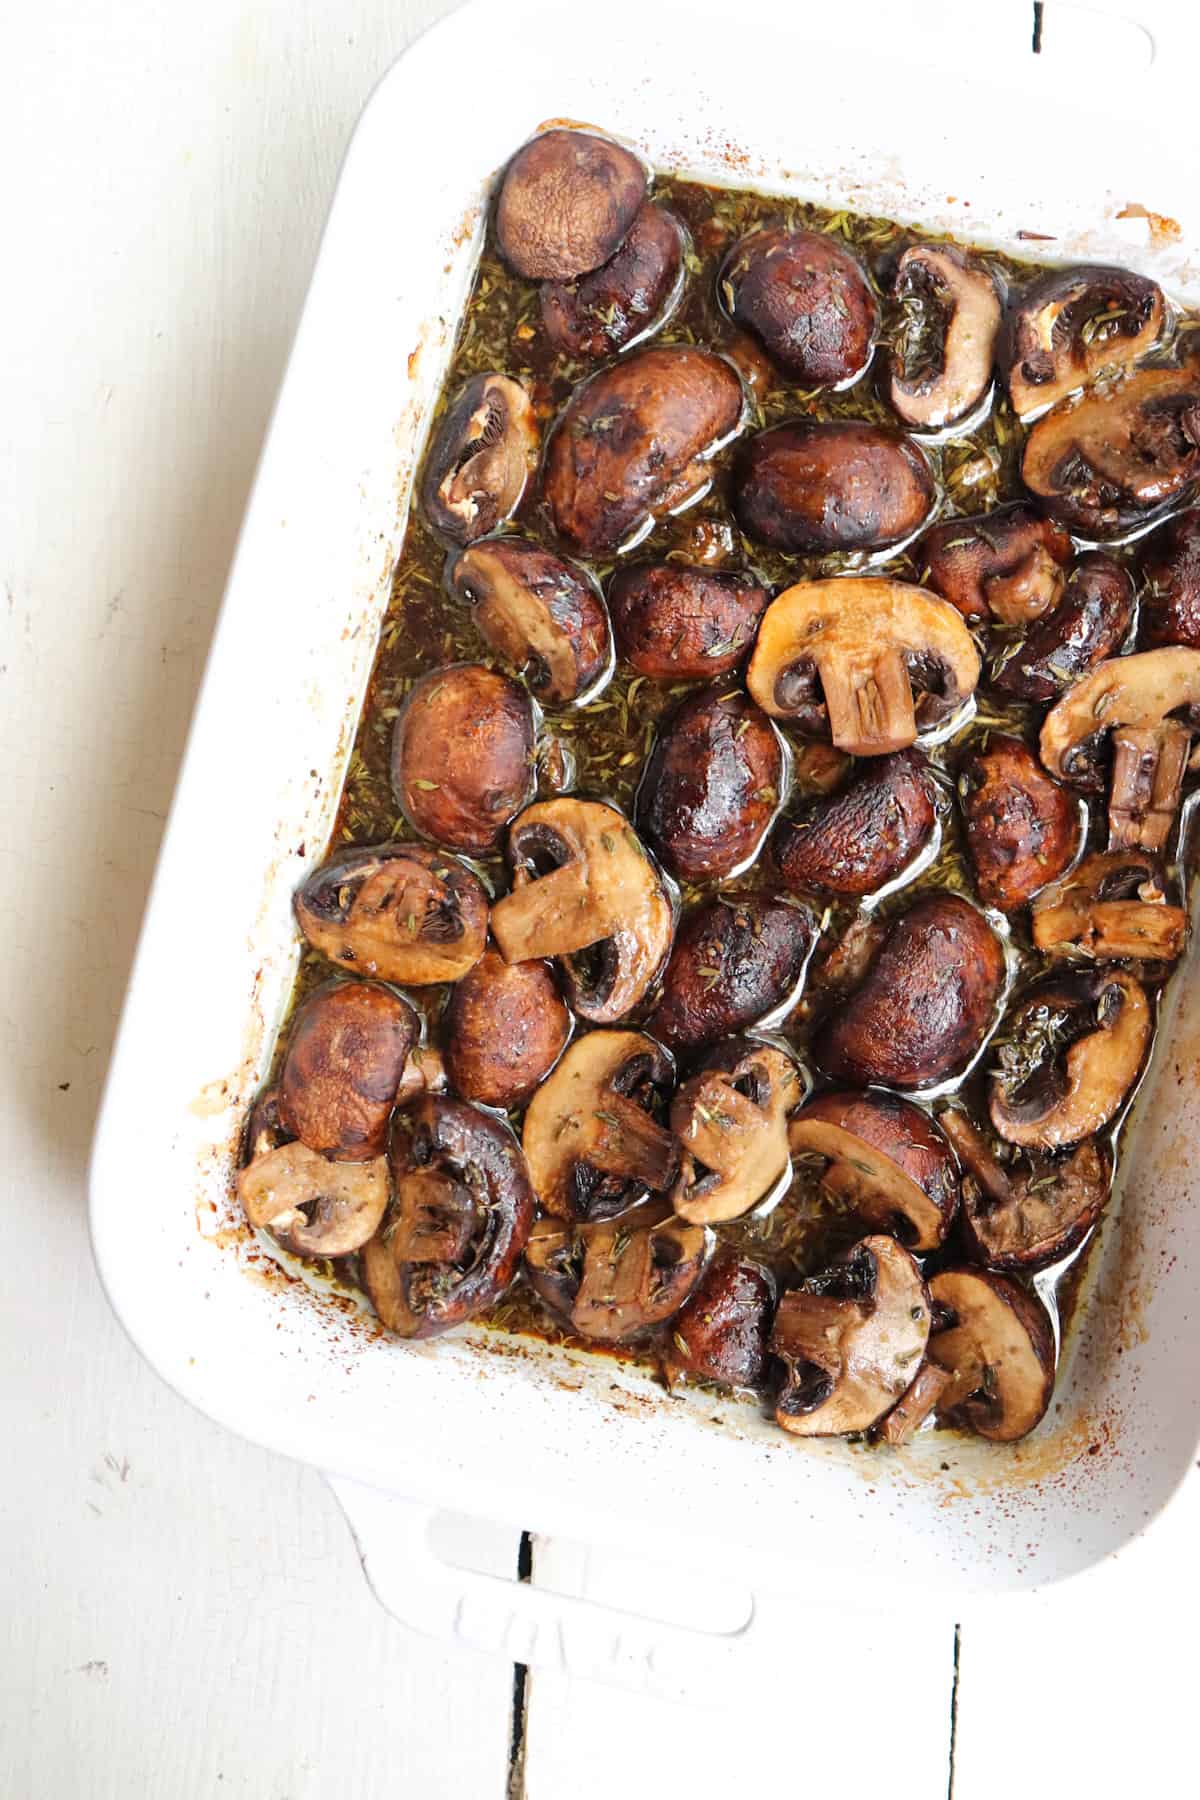 finished roasted mushrooms in a white baking dish.